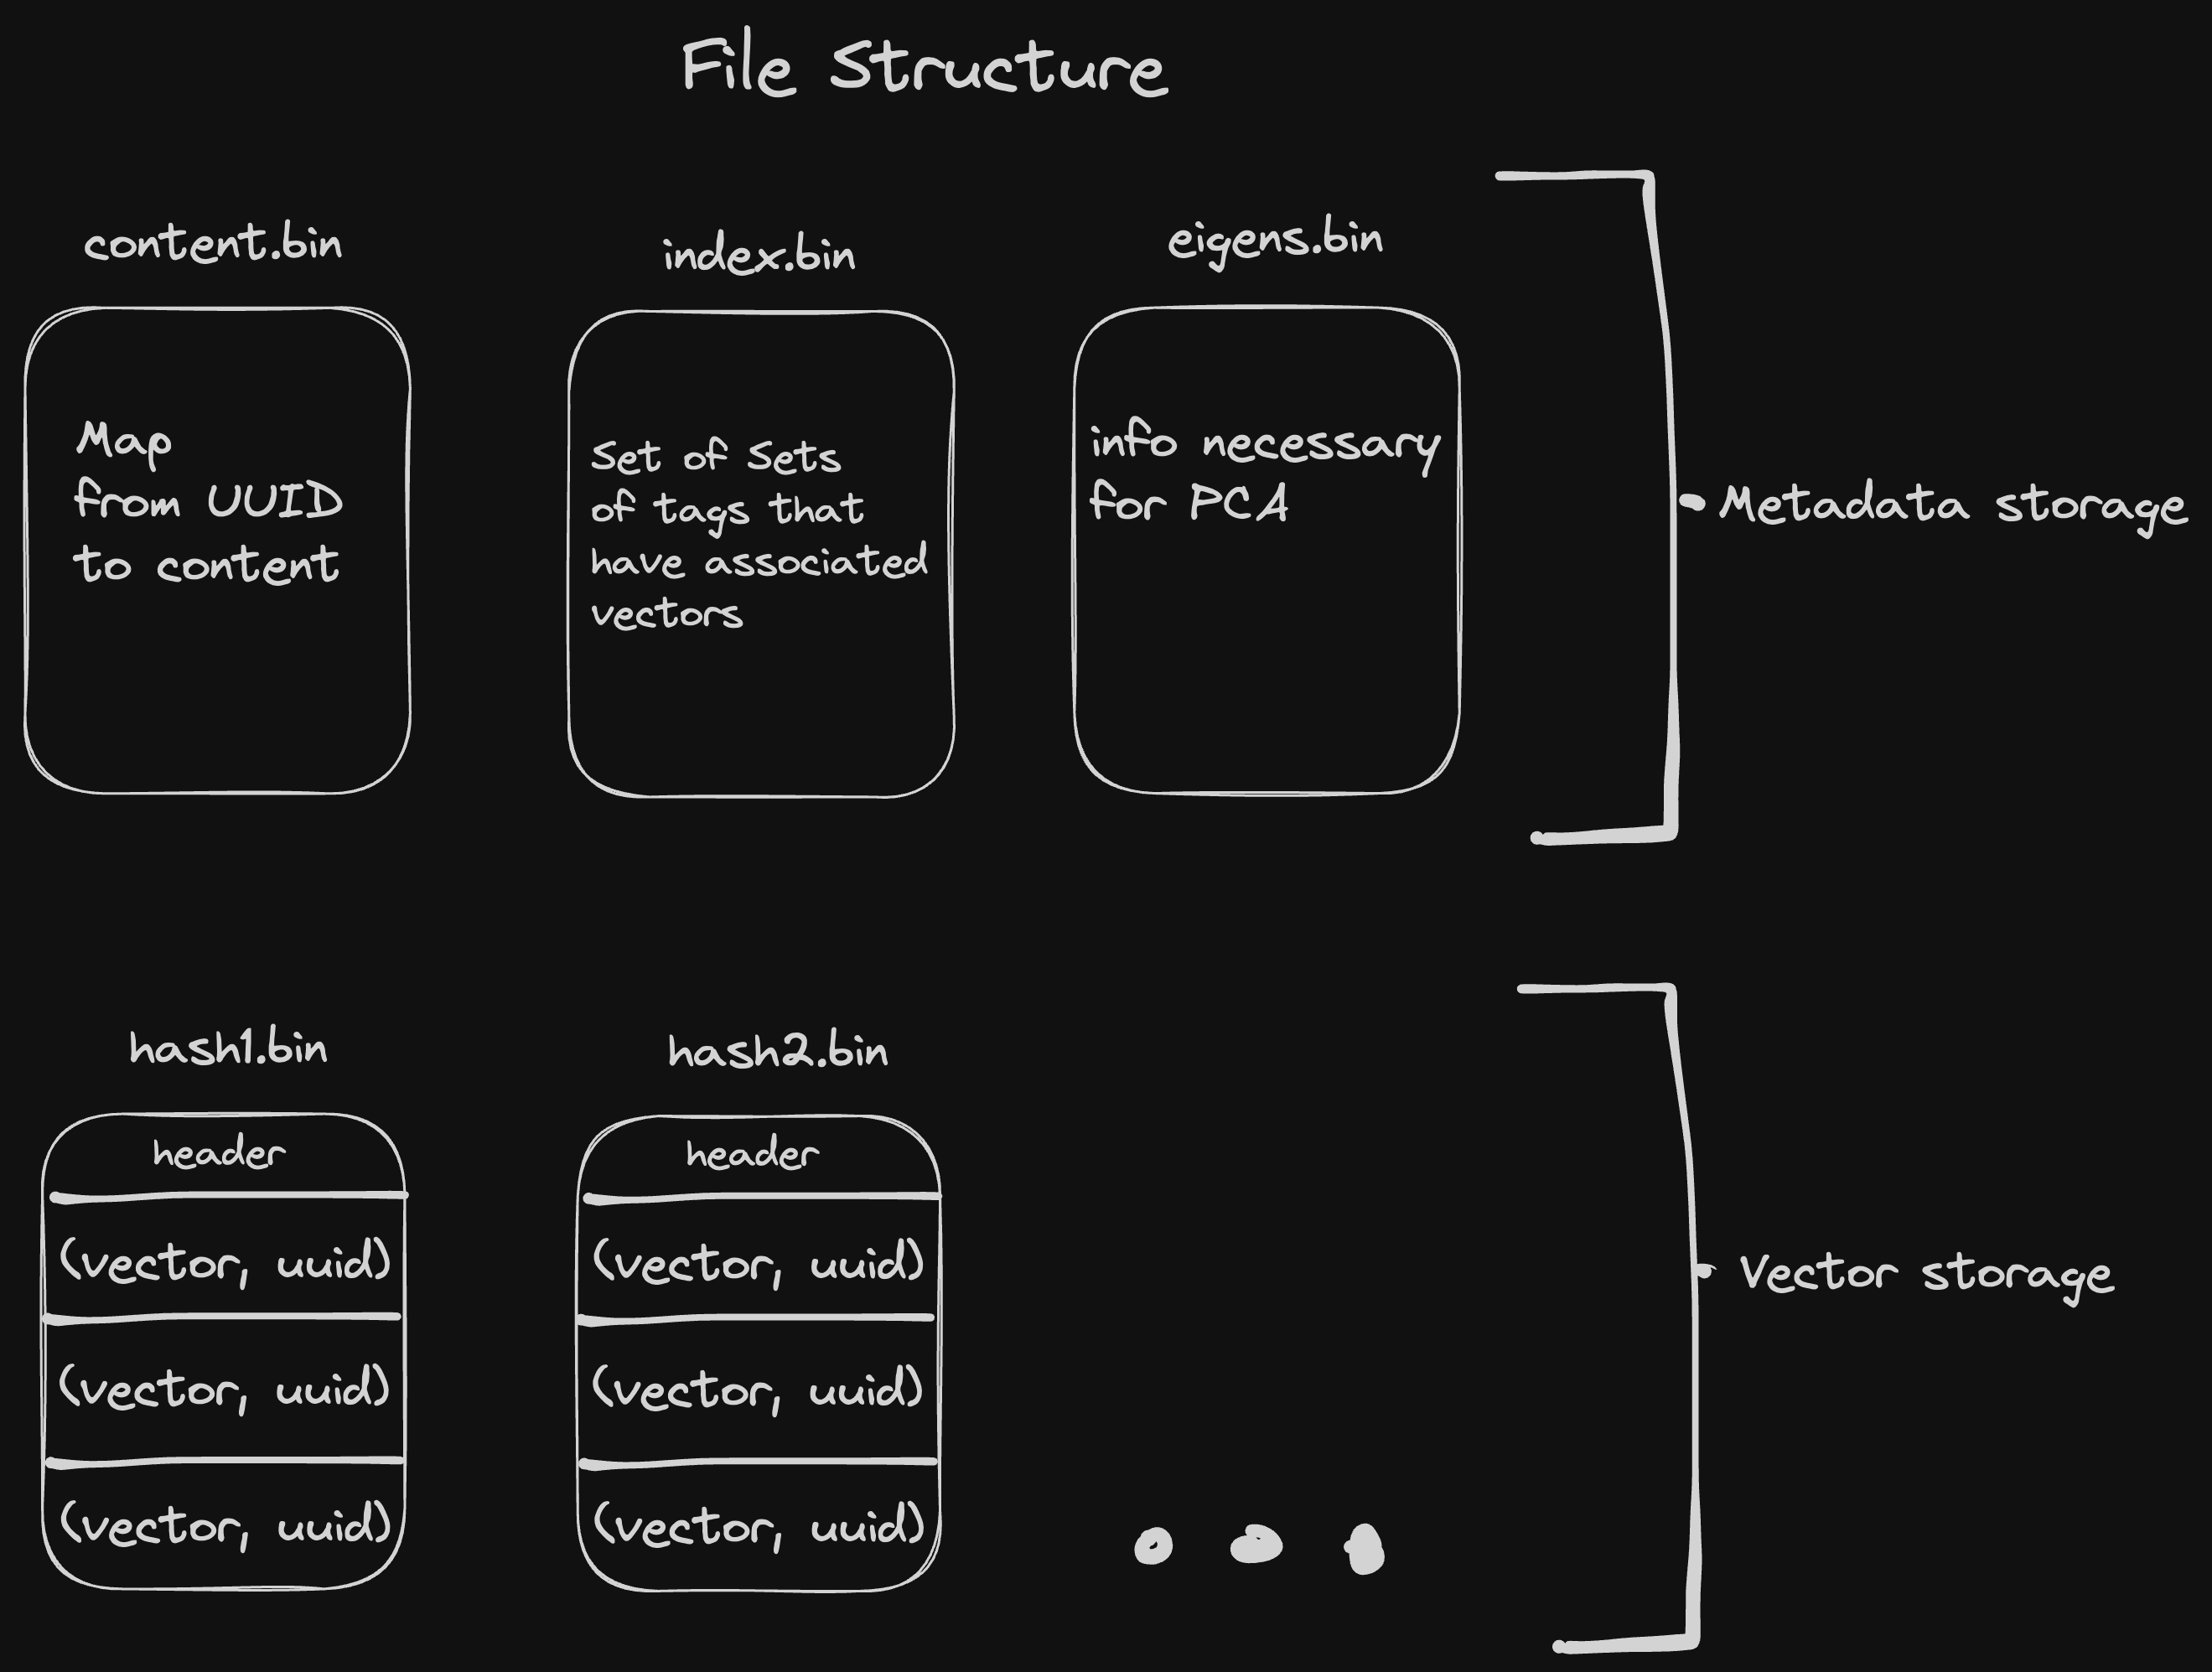 File structure explanation